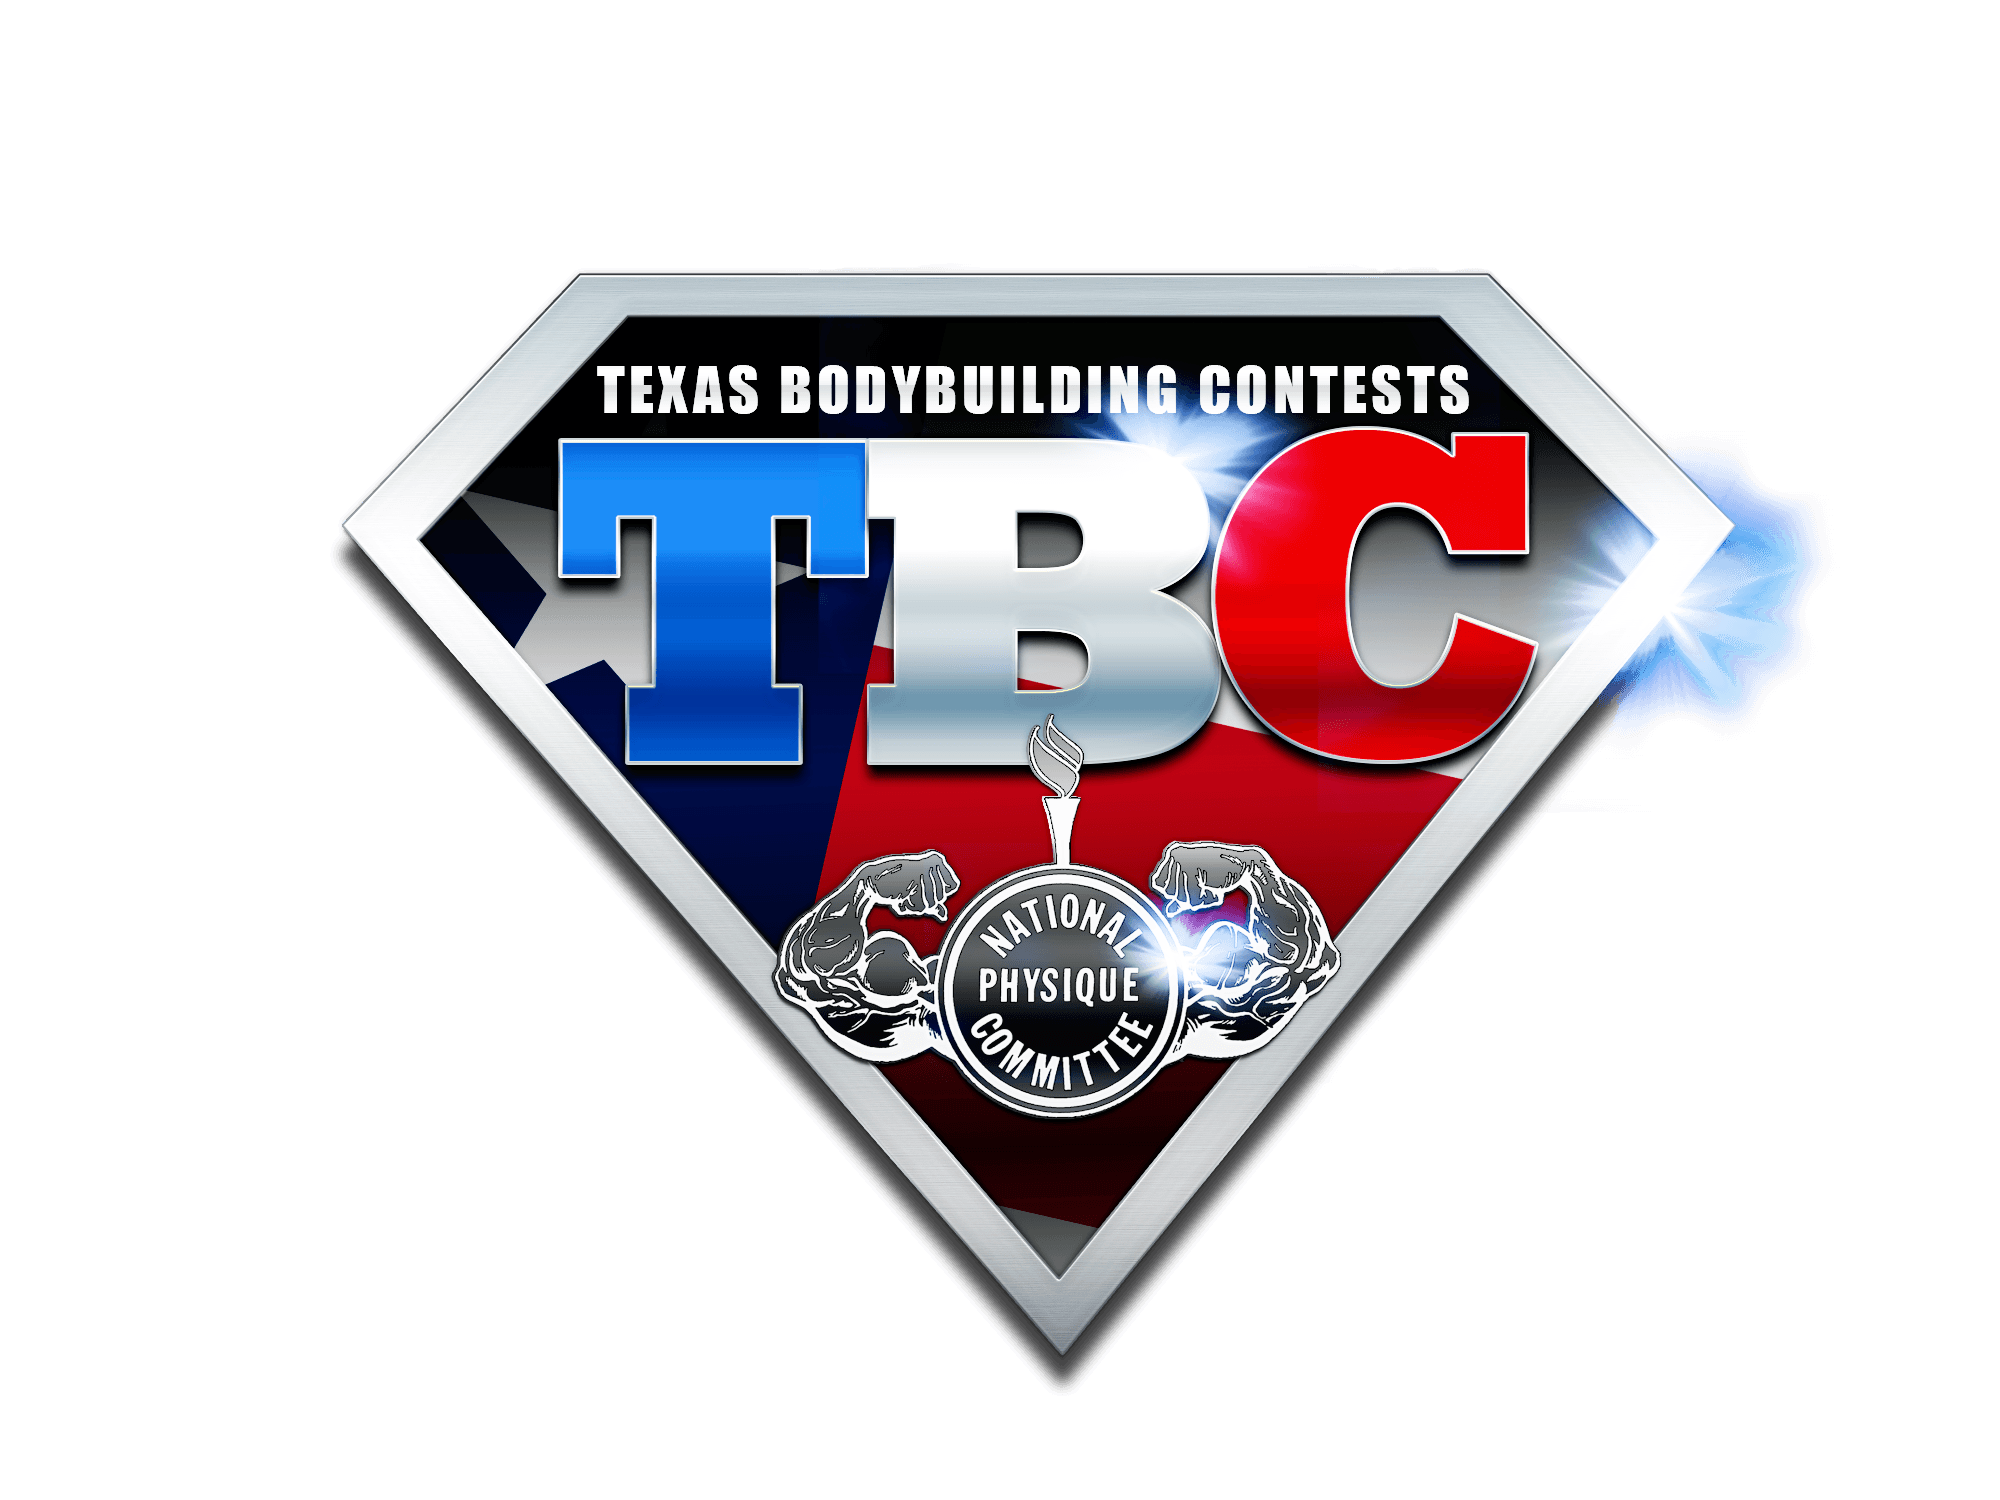 TBC Logo - Final Tbc Logo With Sparkles. Texas National Physique Committee